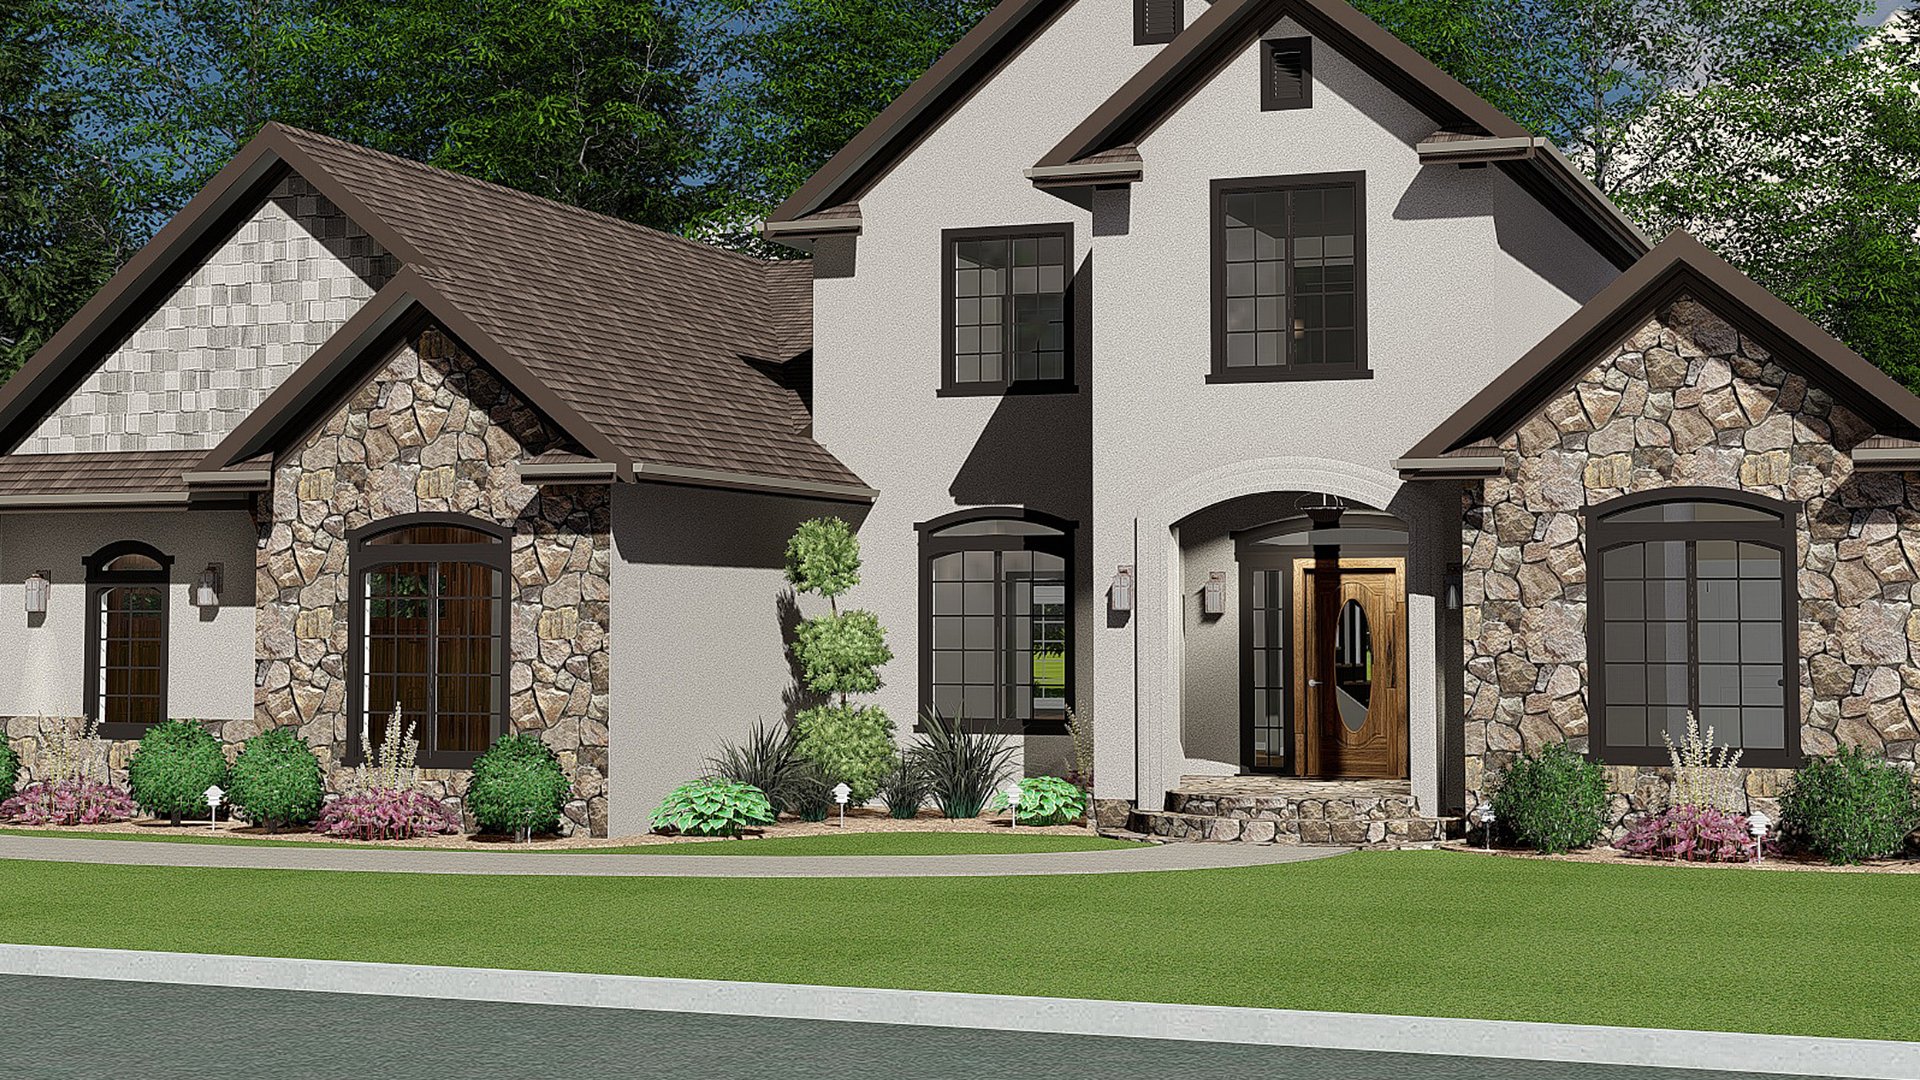 Should You Choose a 2D or 3D Design Rendering for Your Landscaping Project?